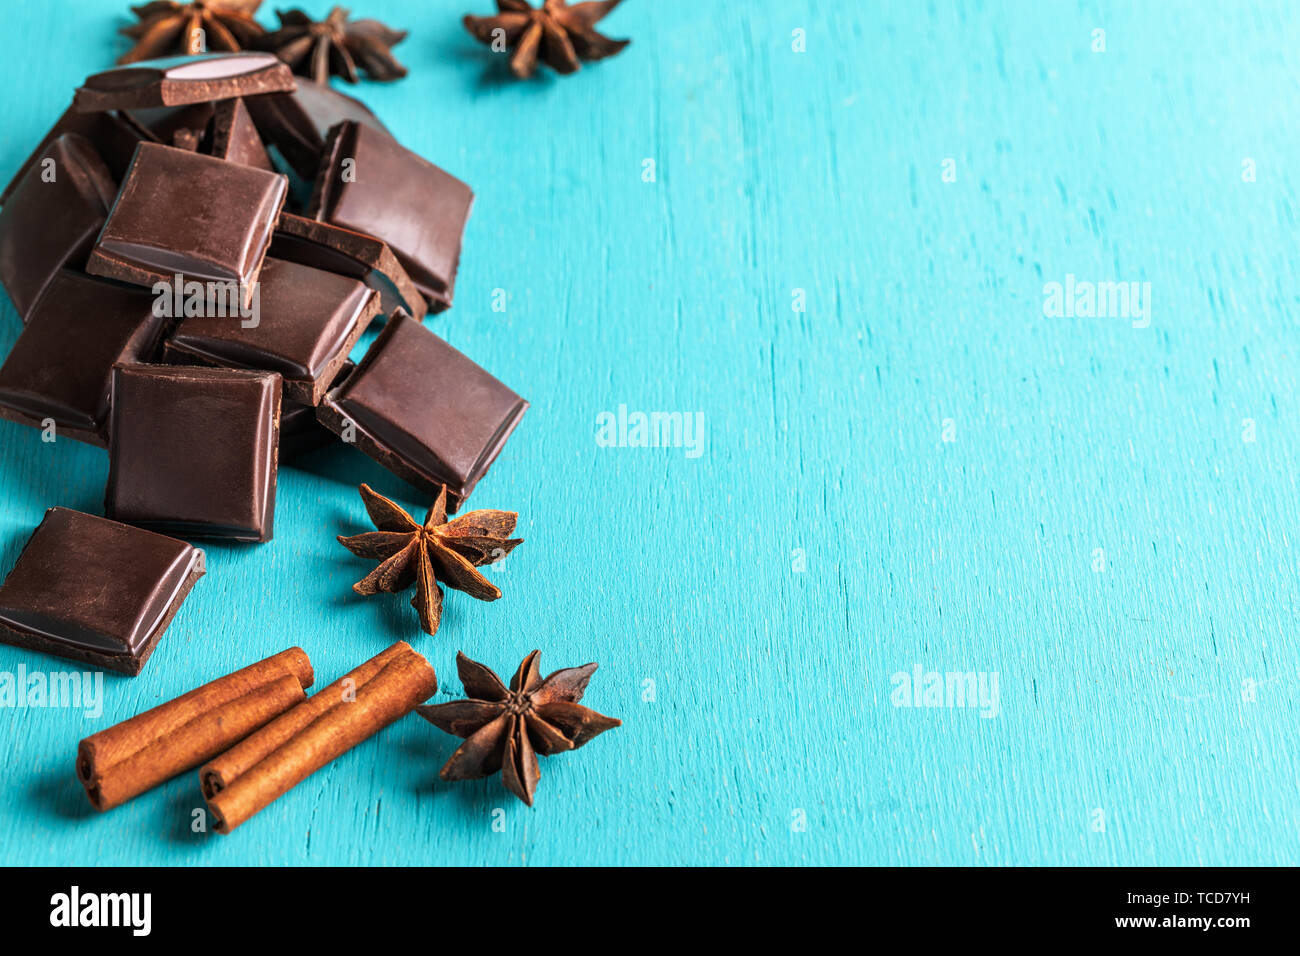 Heap of slices of chocolate, cinnamon sticks and stars anise on turquoise background. Stock Photo